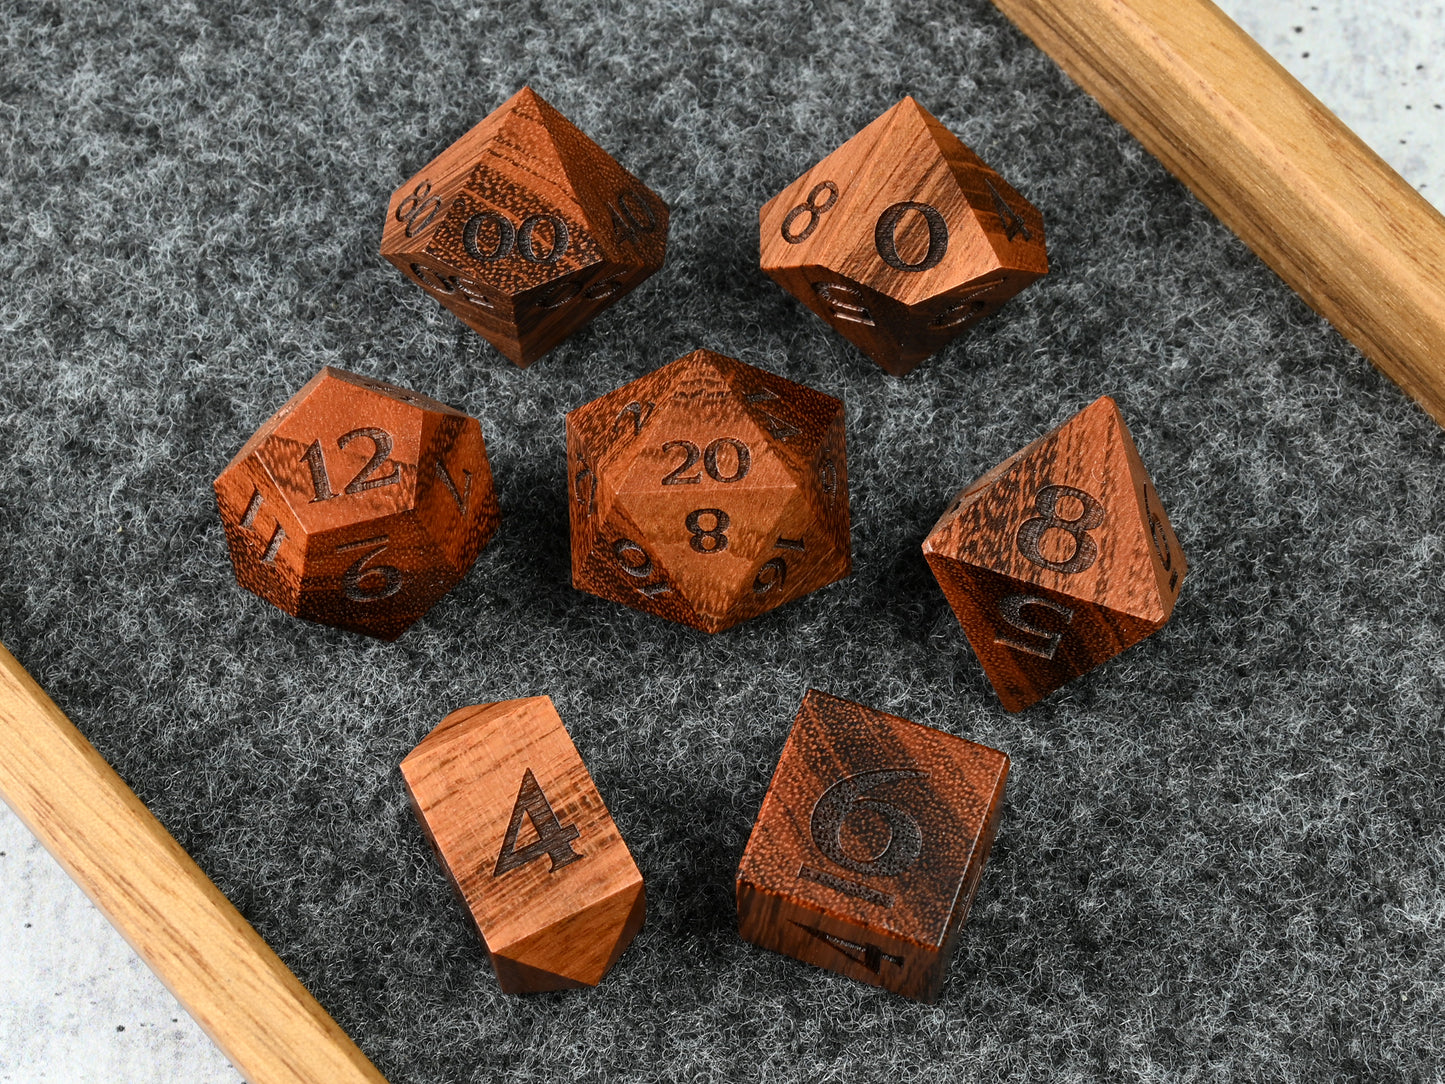 Quebracho axebreaker wood dice for dnd rpg dungeons and dragons tabletop games.